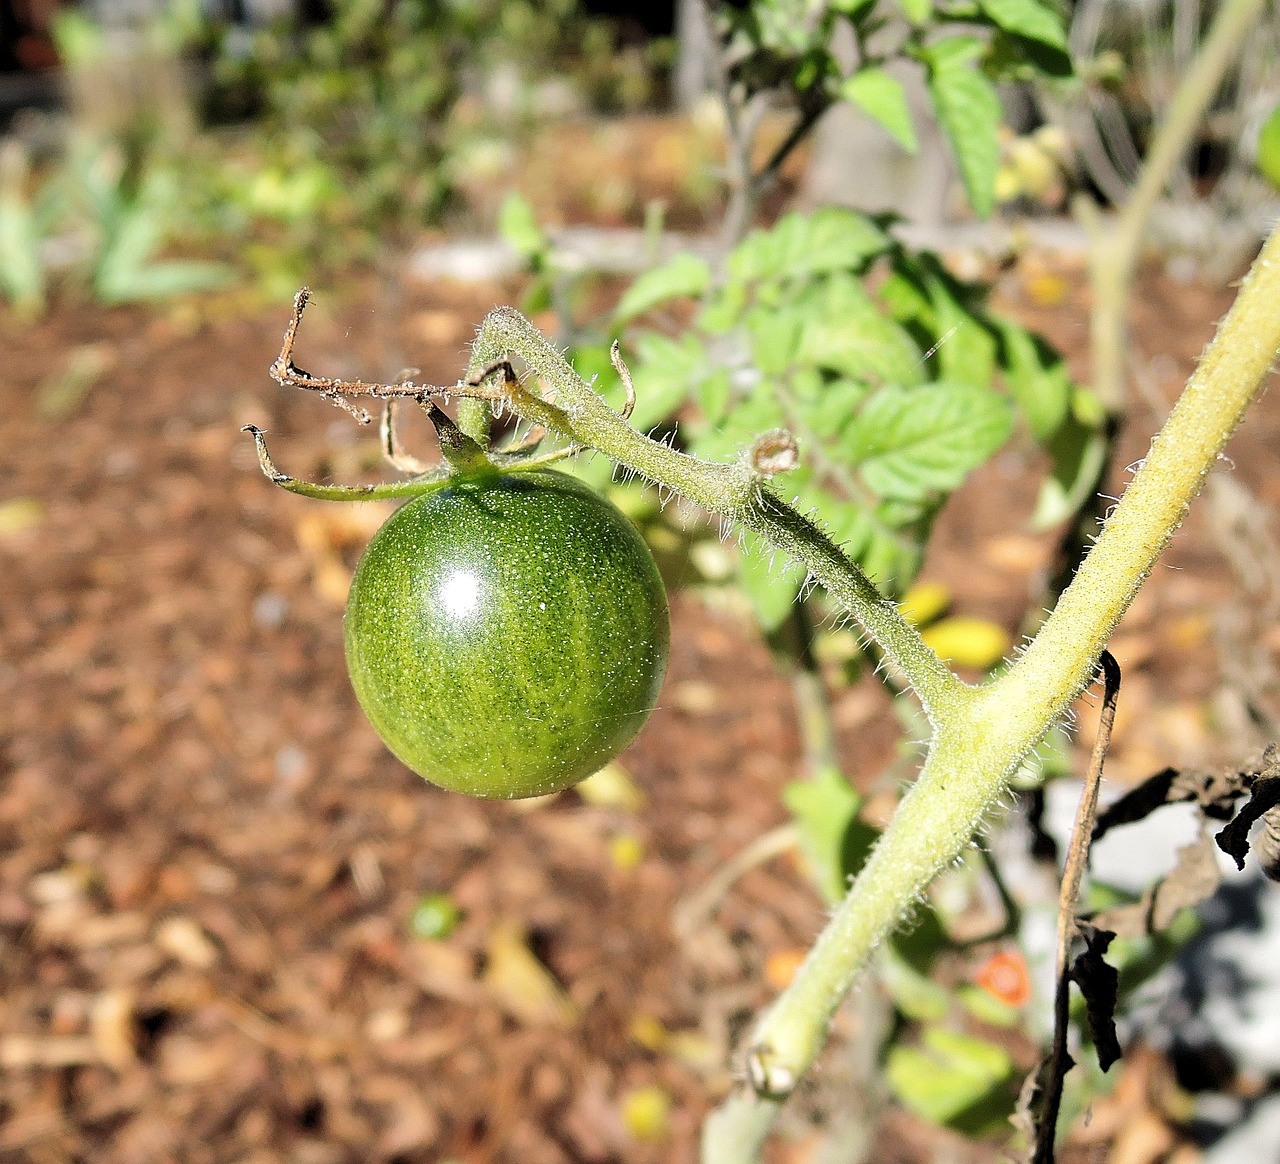 a close up of a green tomato on a plant, renaissance, dsrl photo, spherical, in the yard, watermelon